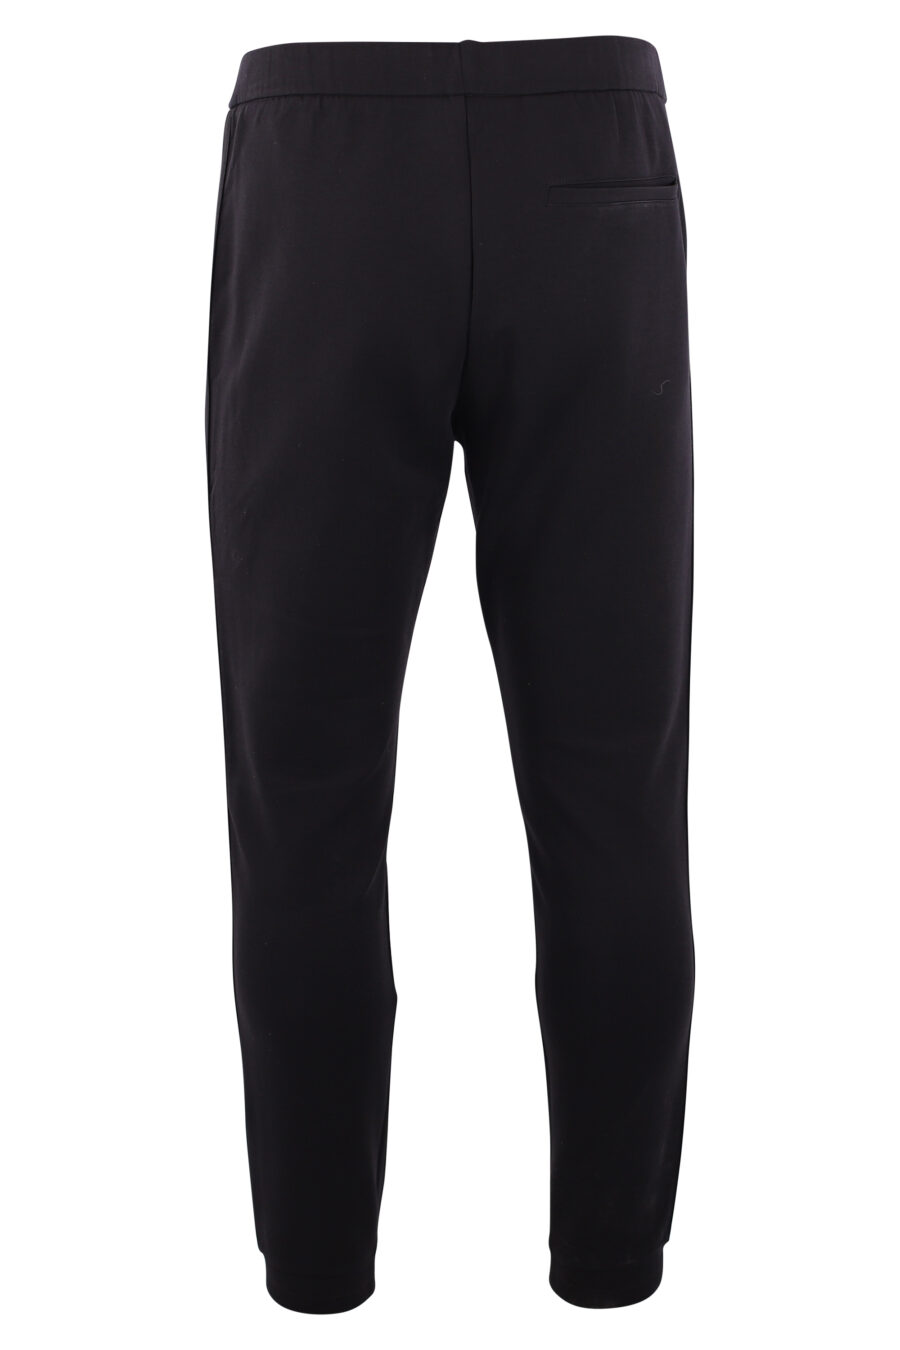 Tracksuit bottoms black with vertical side logo - IMG 3171